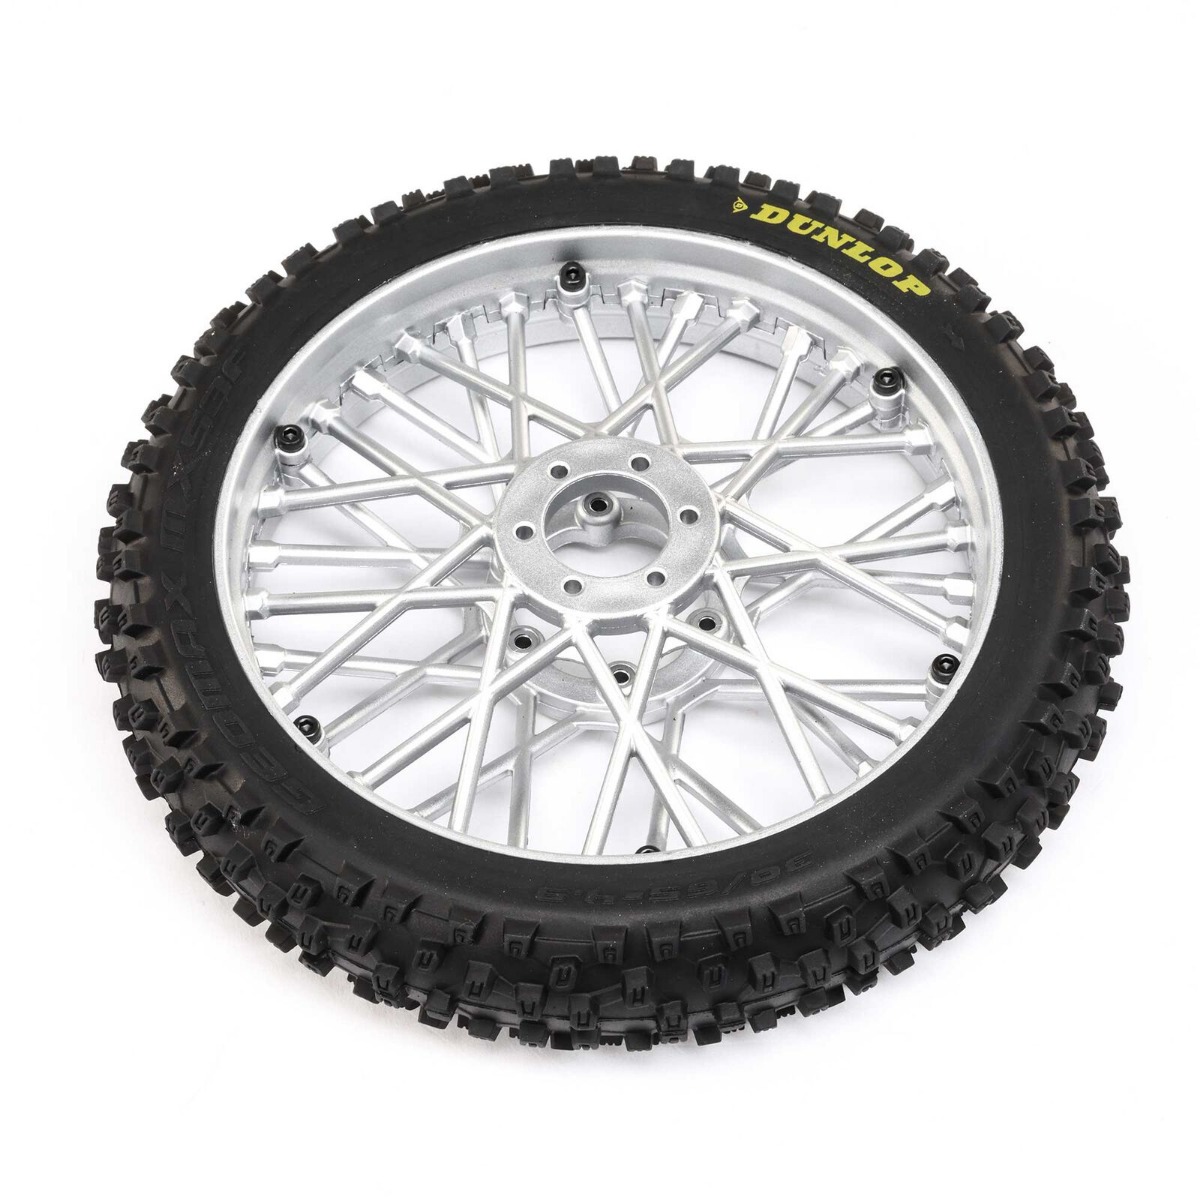 Losi - Dunlop MX53 Front Tire Mounted, Chrome: Promoto-MX (LOS46006)